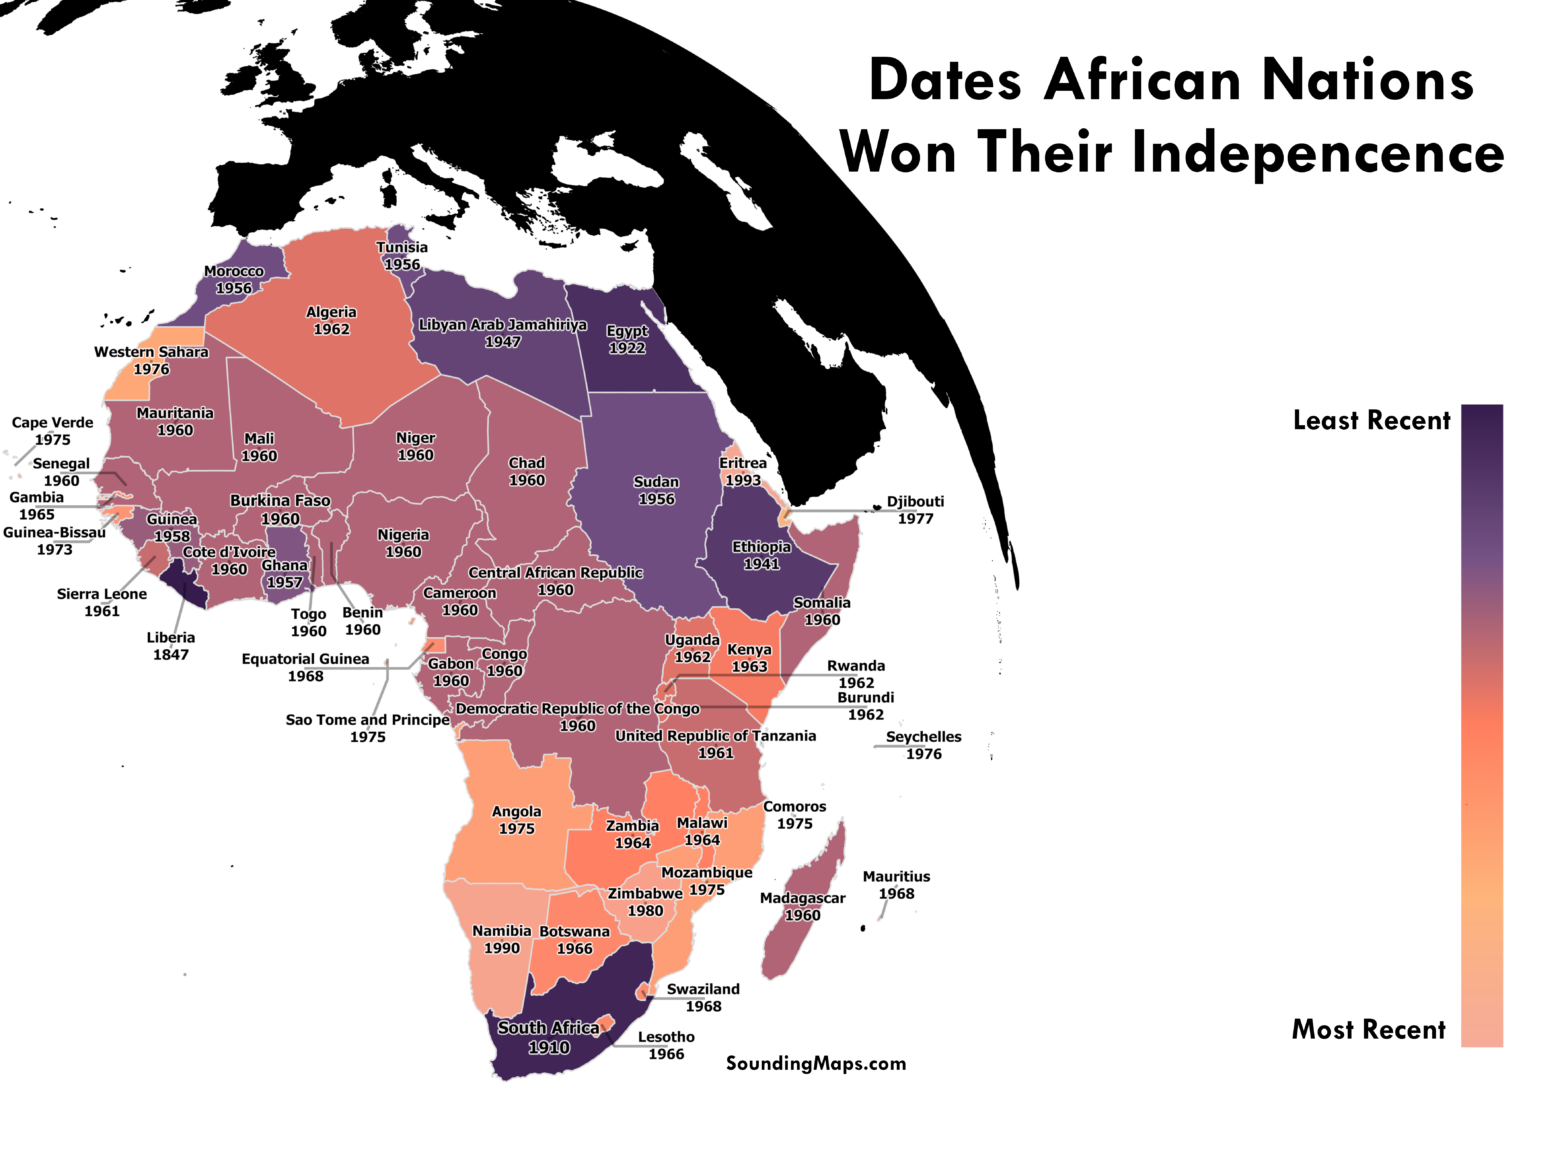 Dates of African Nations Independence